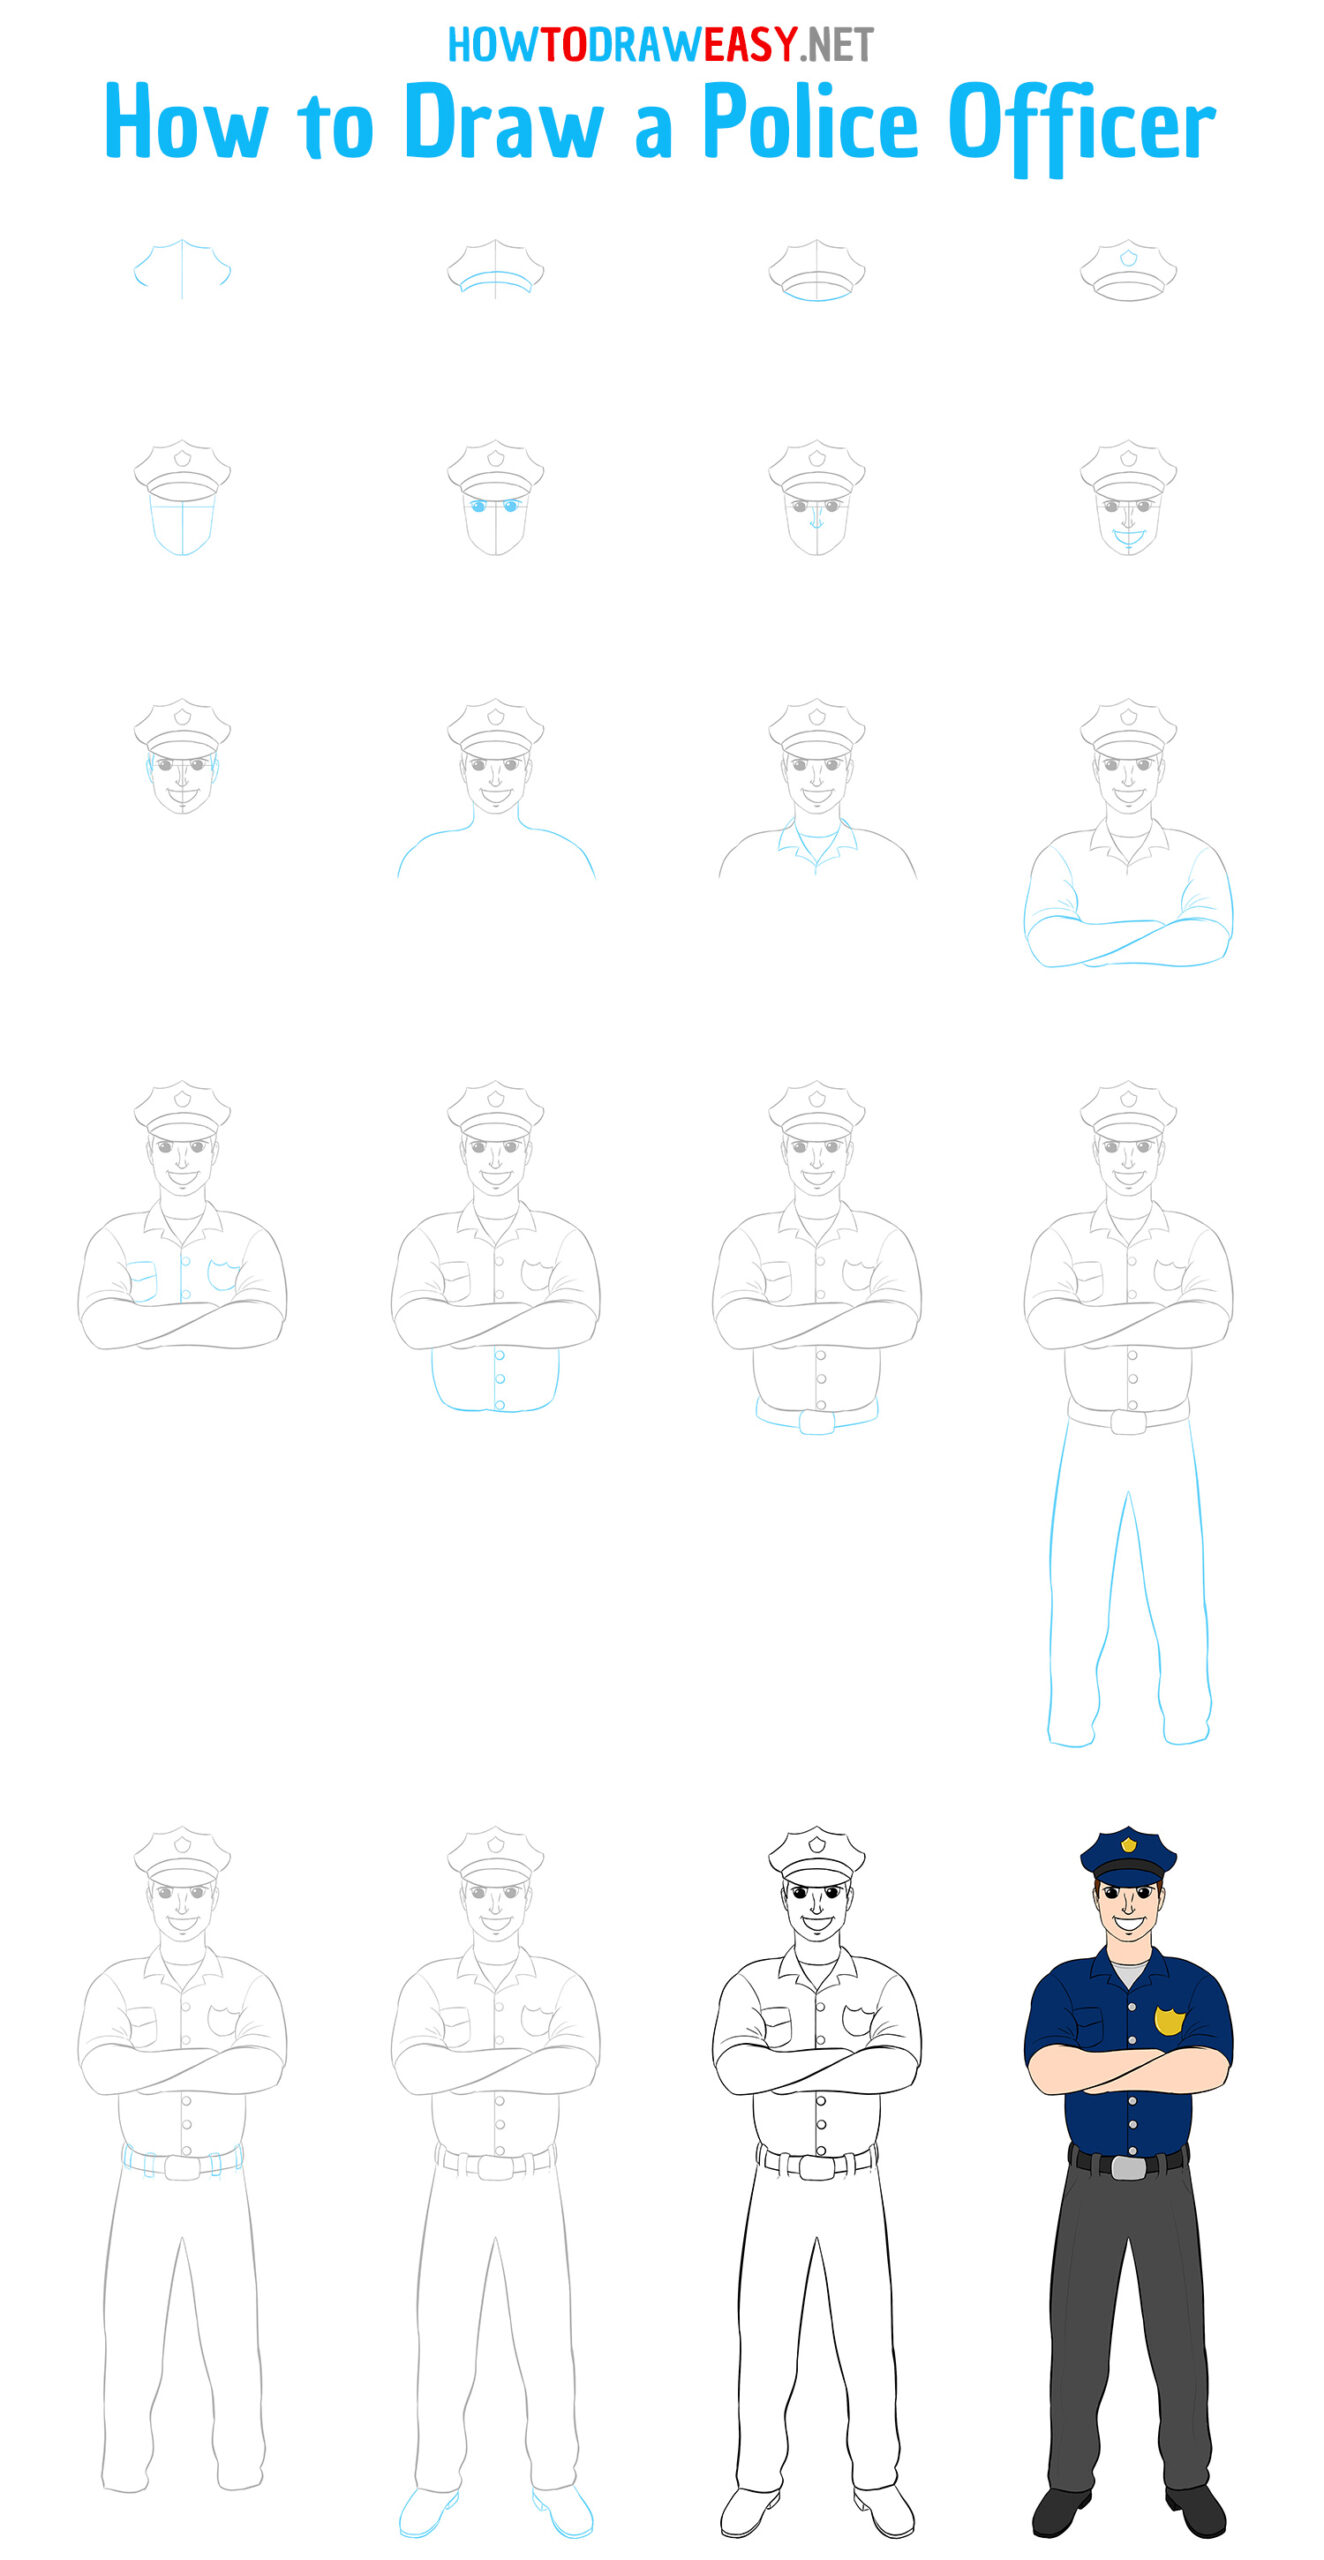 How to Draw a Police Officer Step by Step